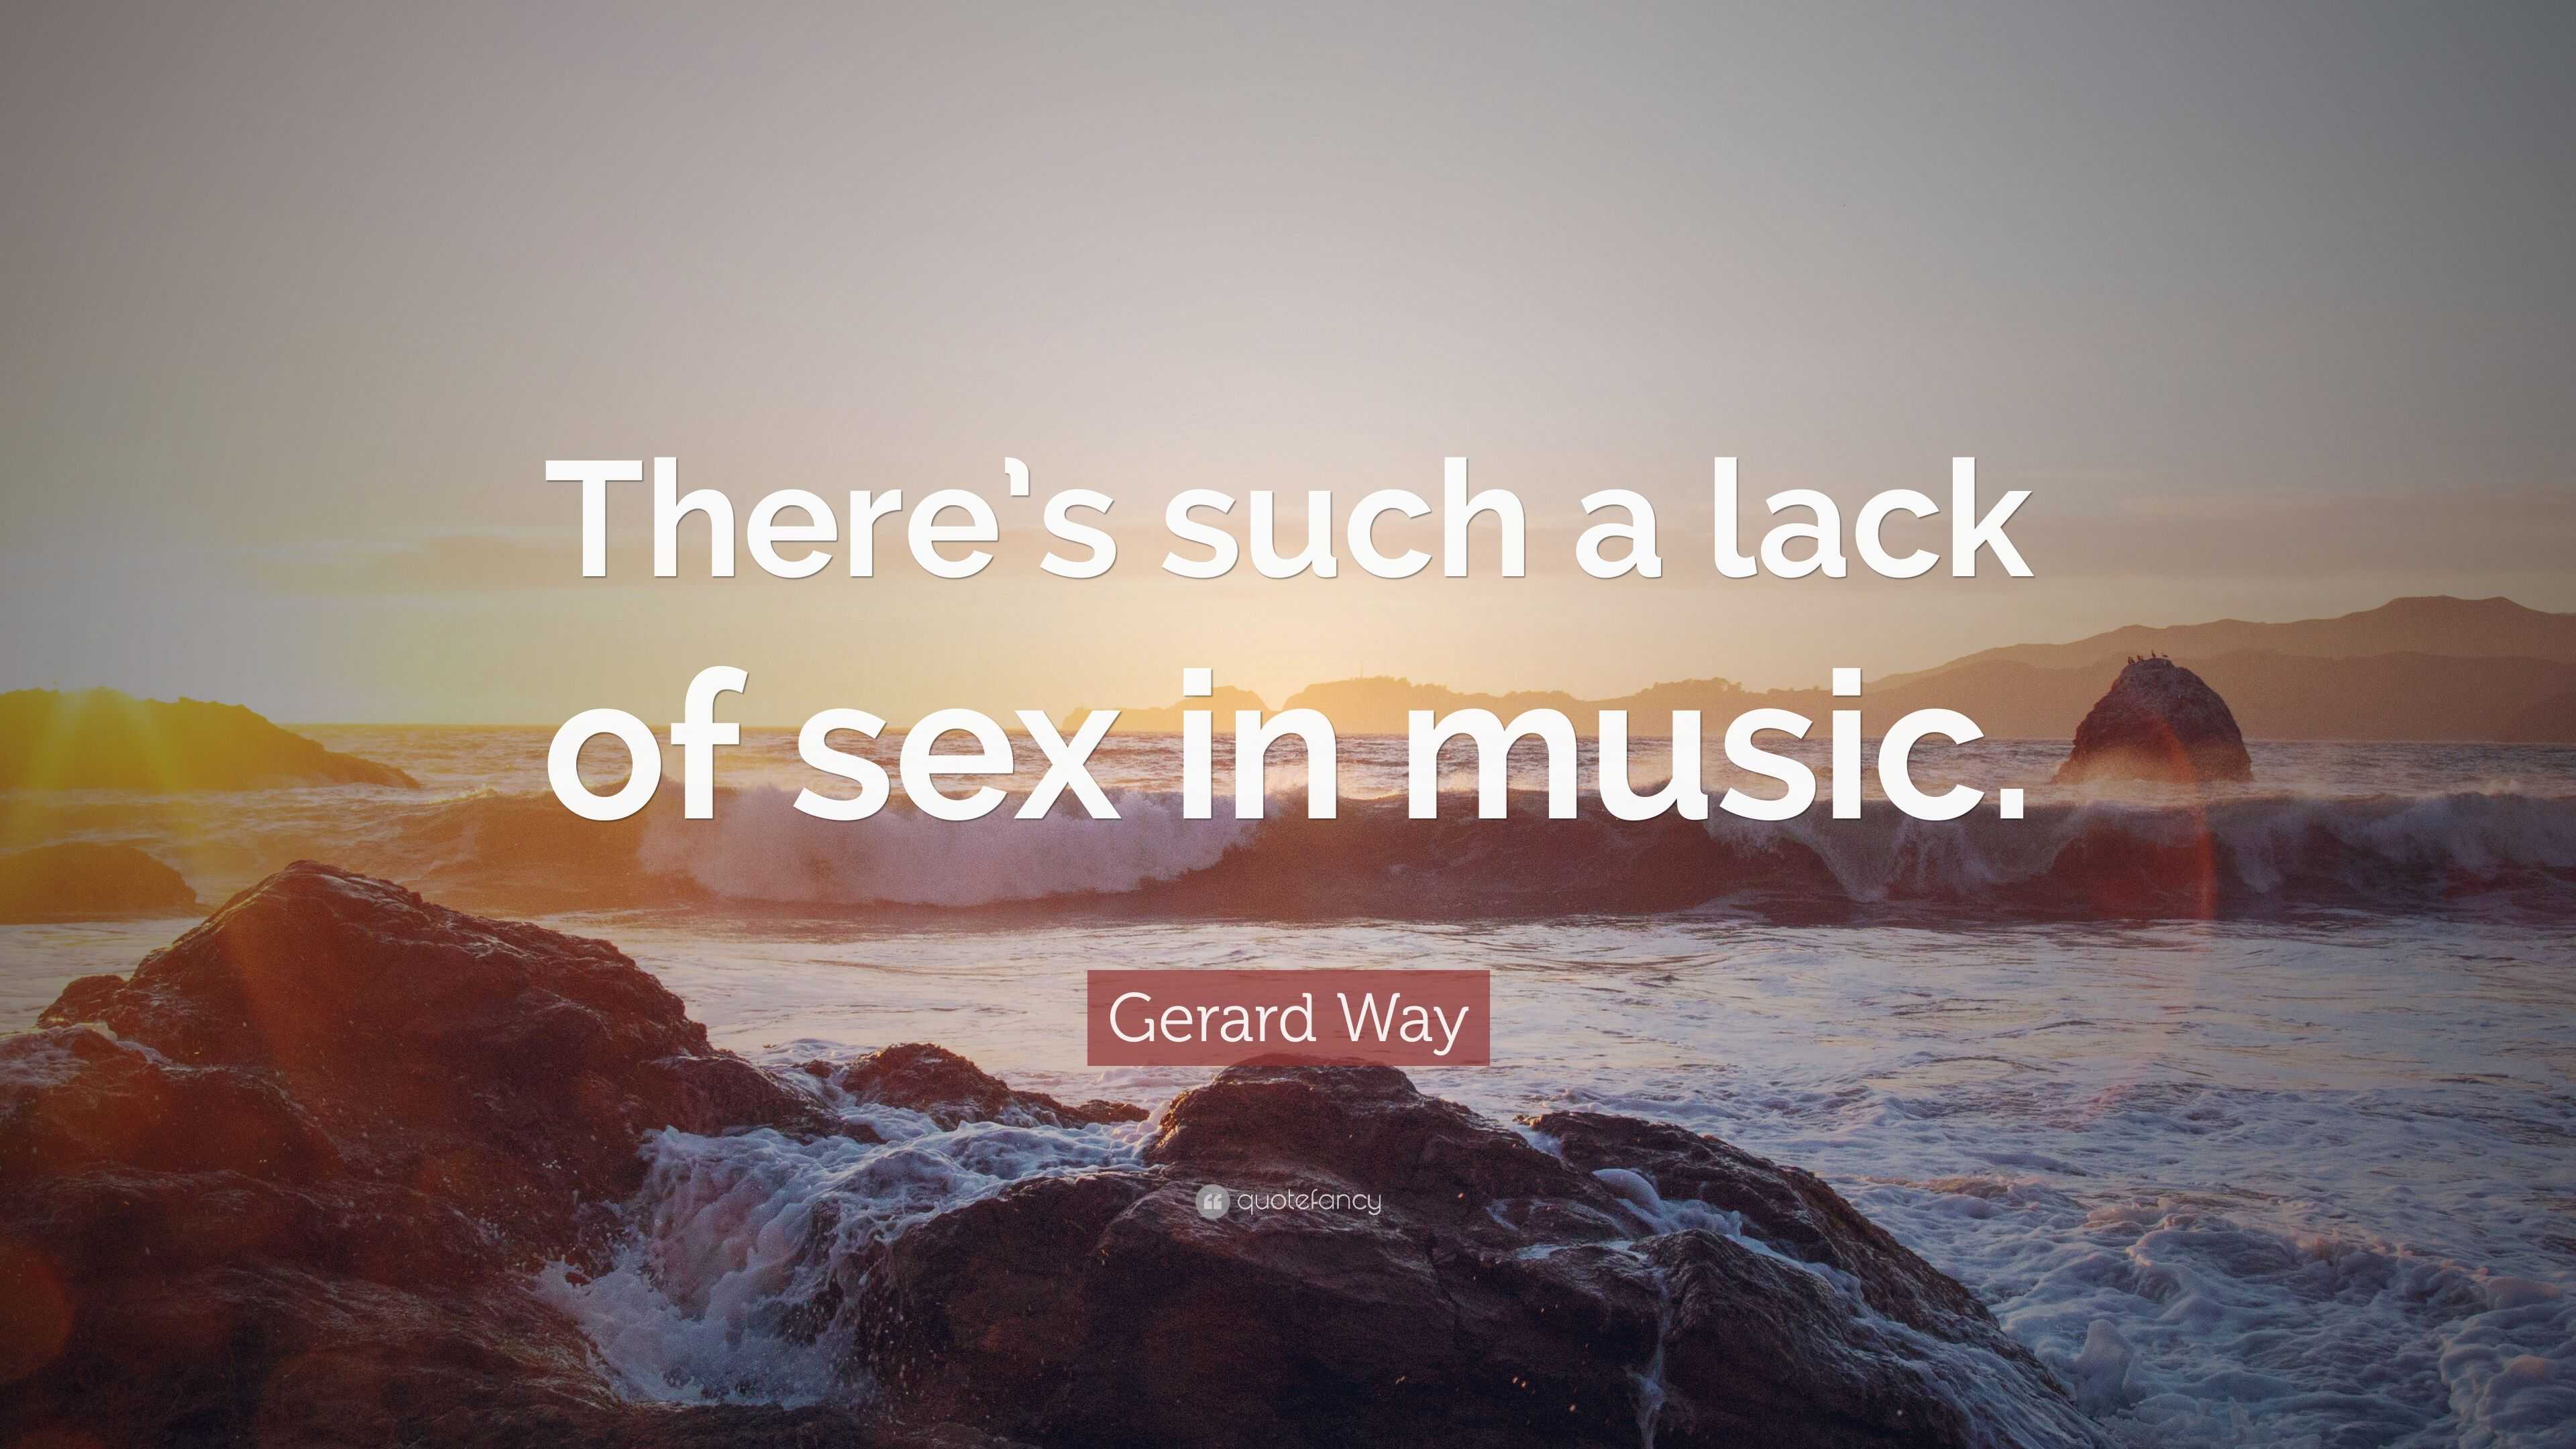 Gerard Way Quote “Theres such a lack of sex in music.”